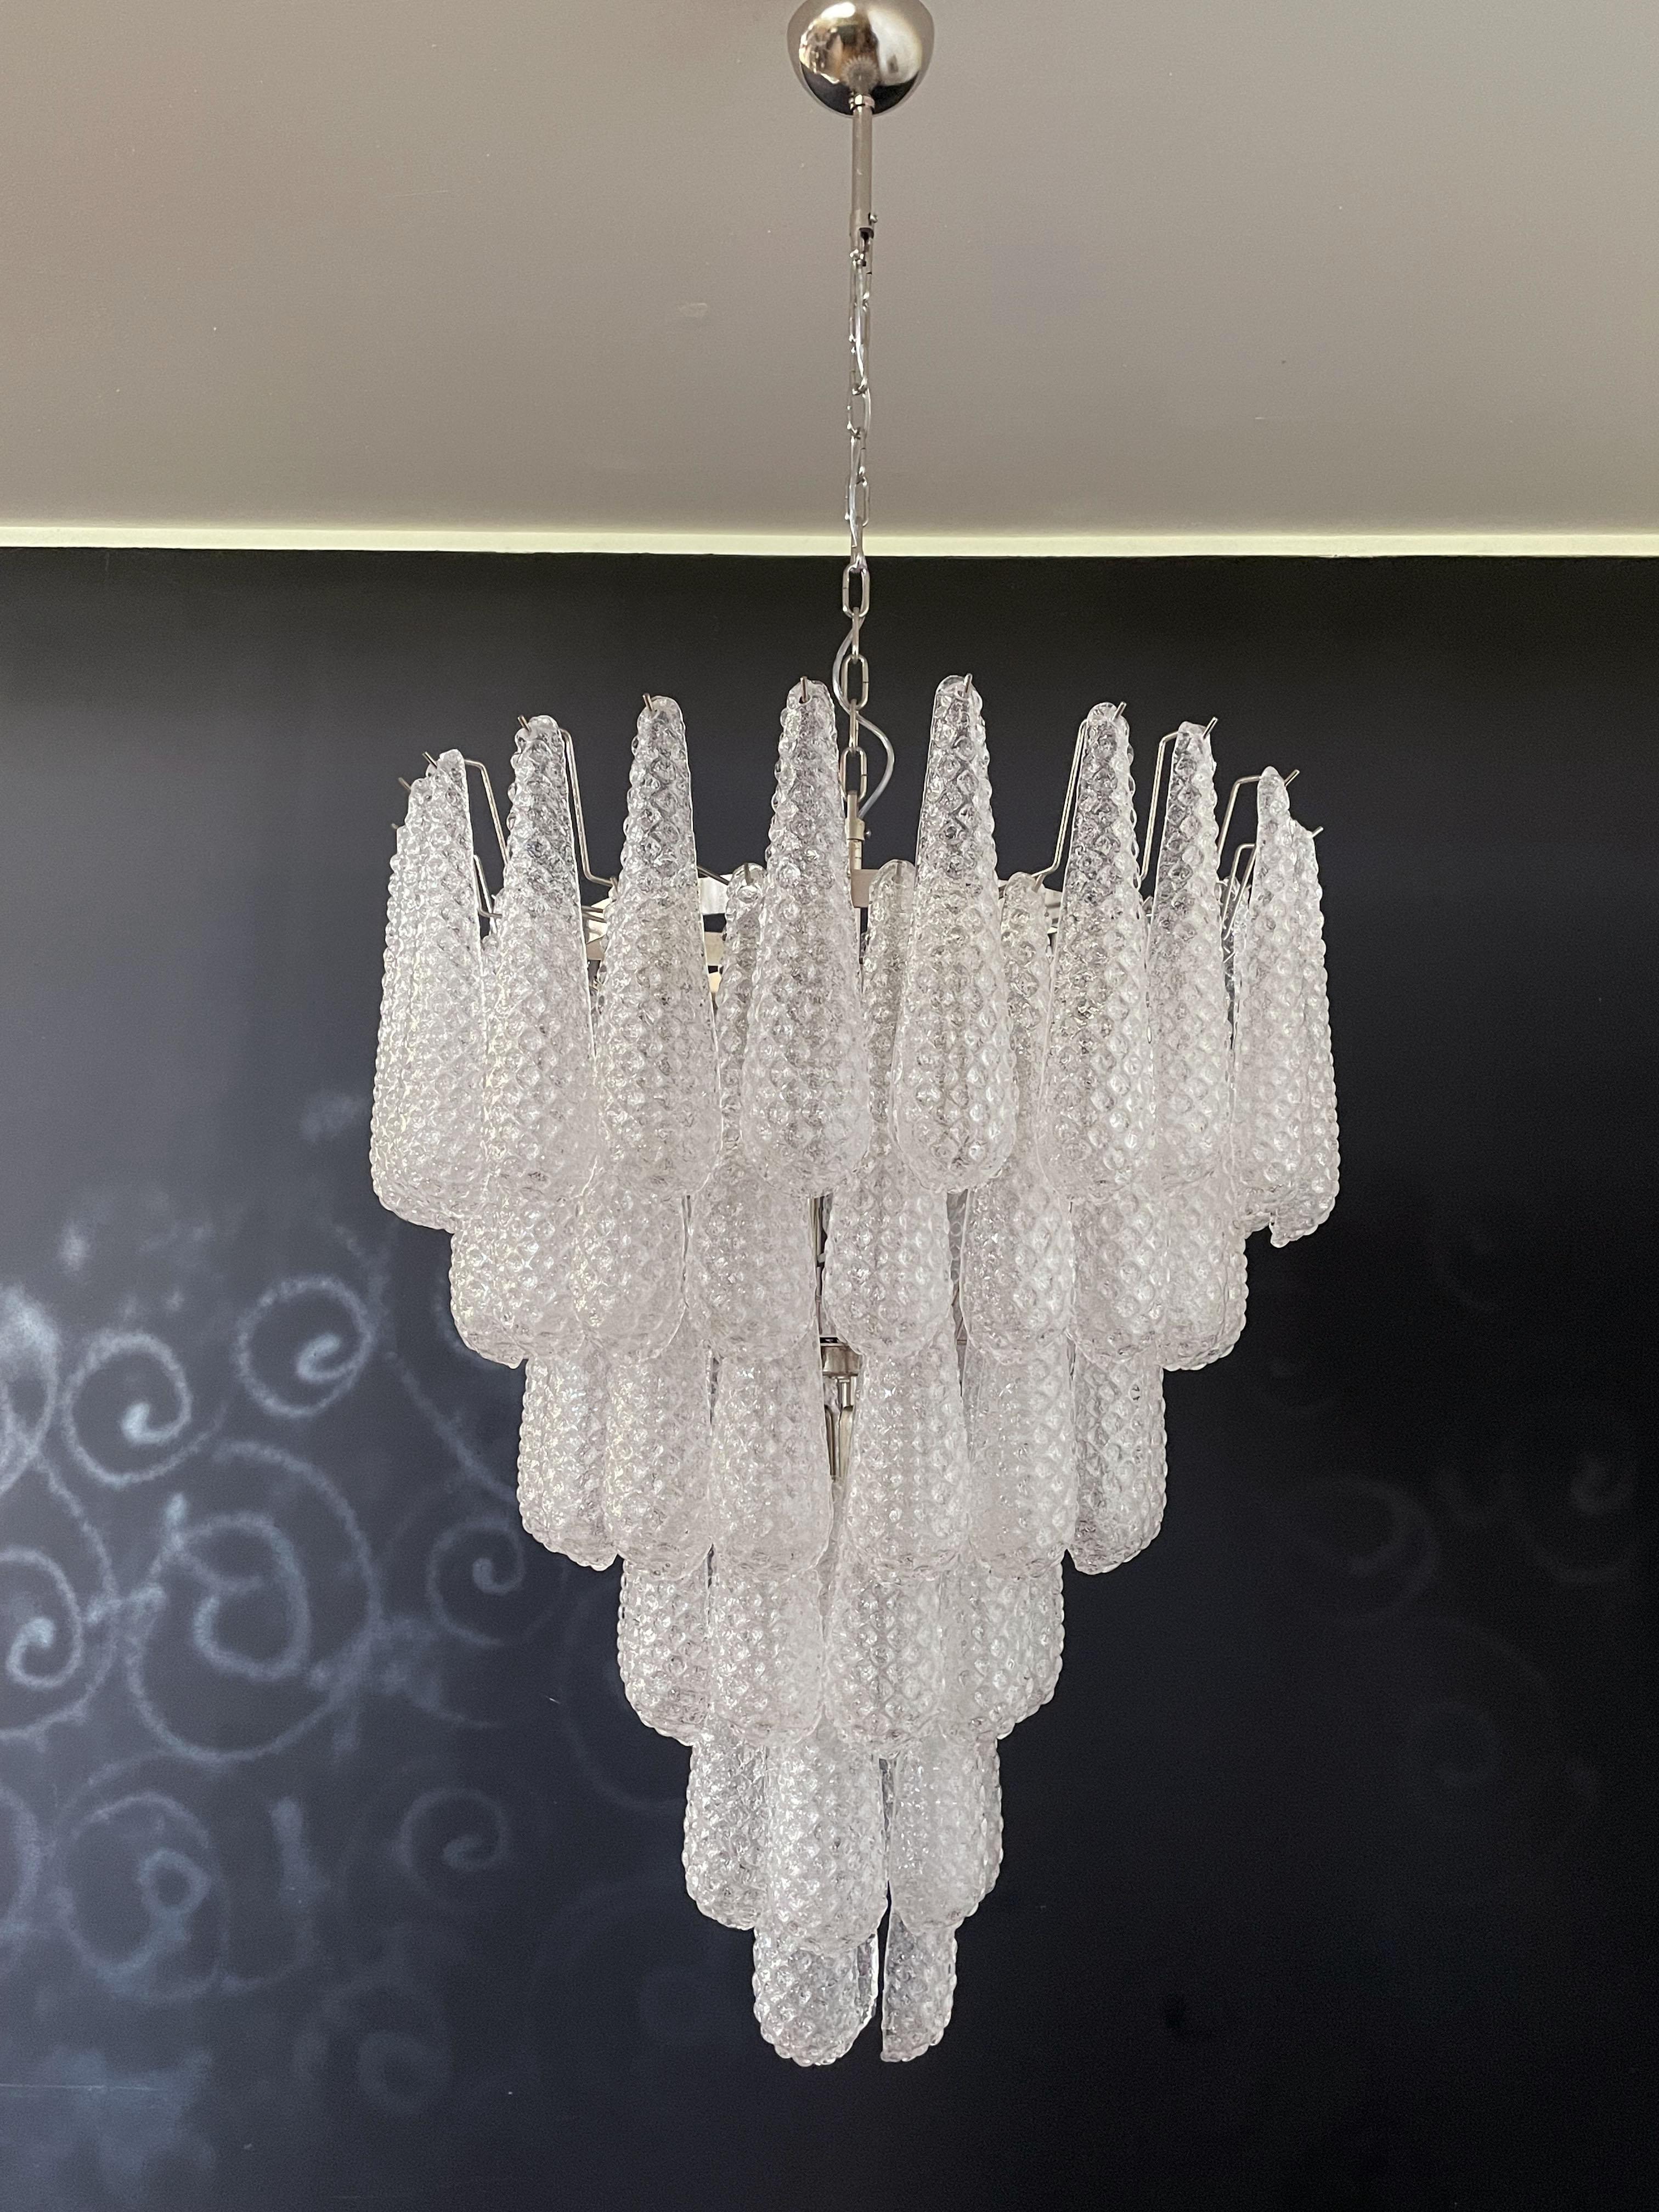 Gorgeous Italian vintage chandelier made from 75 great hourglass Murano glass. Nickel plated metal frame.
Period: late XX century
Dimensions: 65 inches (165 cm) height with chain; 37,40 inches (95 cm) height without chain; 29,50 inches (75 cm)